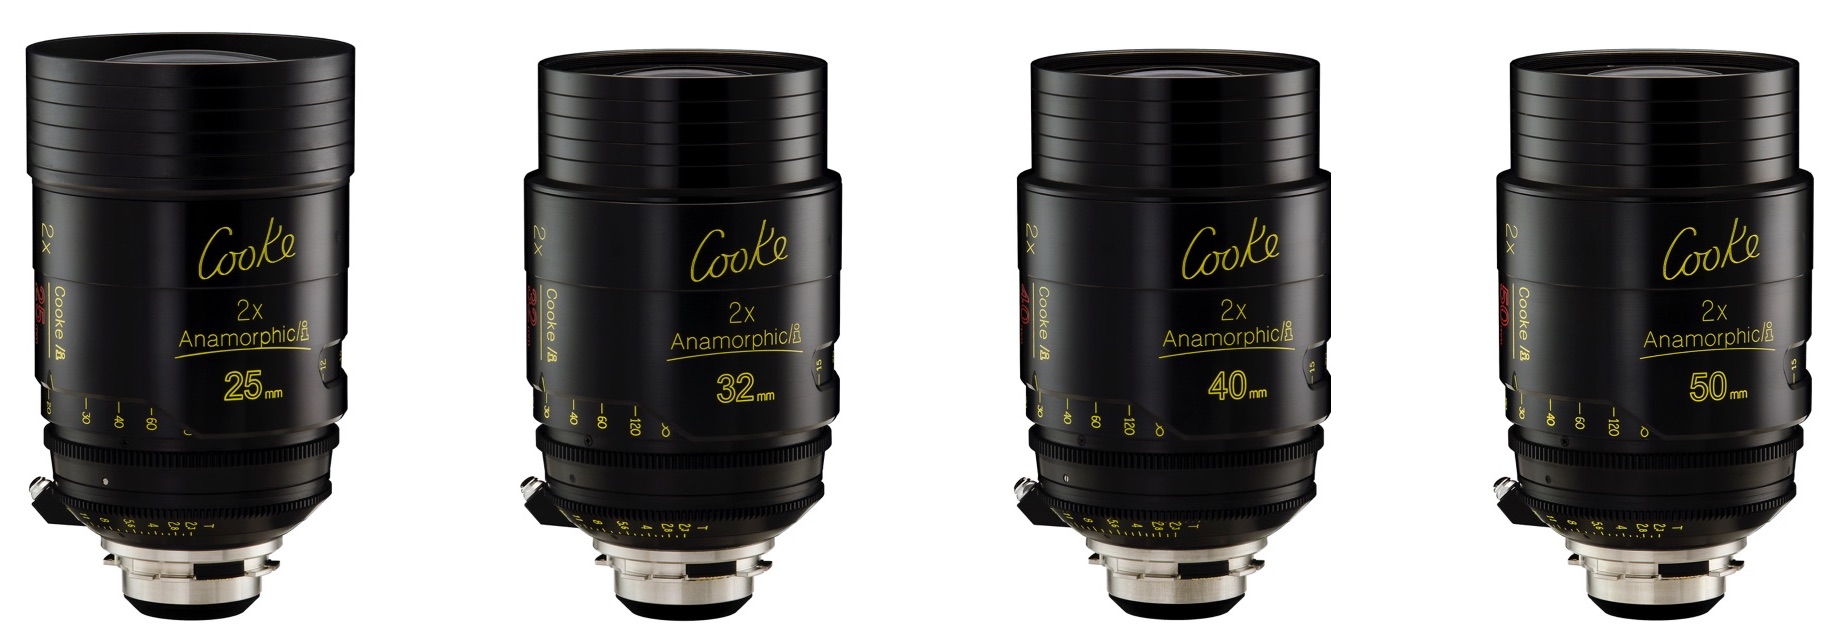 Cooke Anamorphic Lenses Bring Class and Character to a Clean Digital World 3